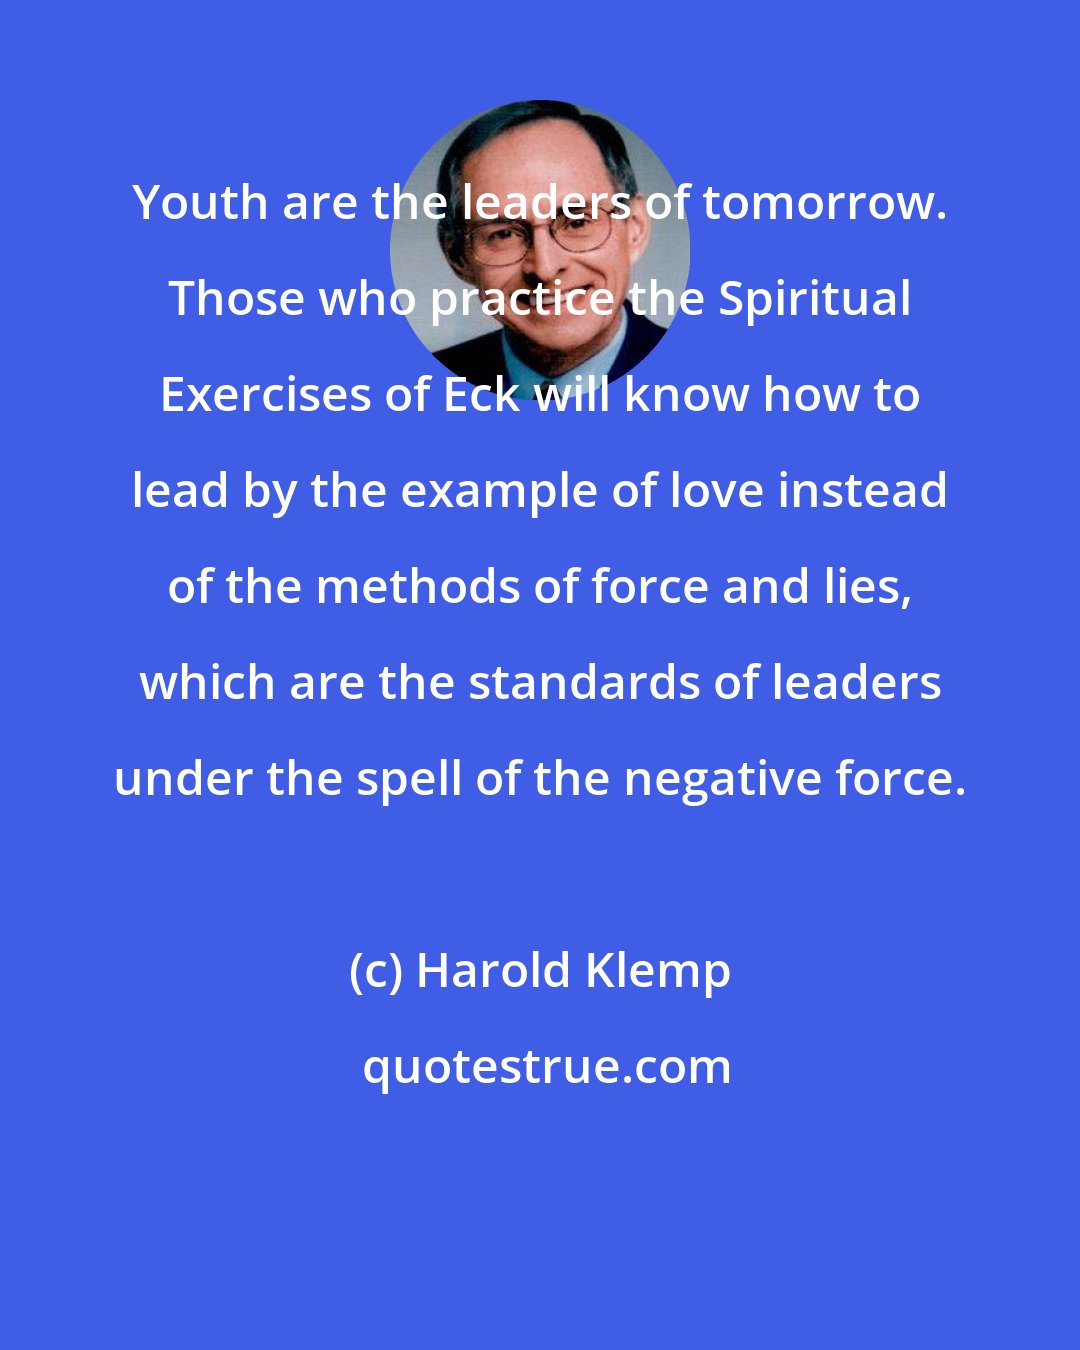 Harold Klemp: Youth are the leaders of tomorrow. Those who practice the Spiritual Exercises of Eck will know how to lead by the example of love instead of the methods of force and lies, which are the standards of leaders under the spell of the negative force.